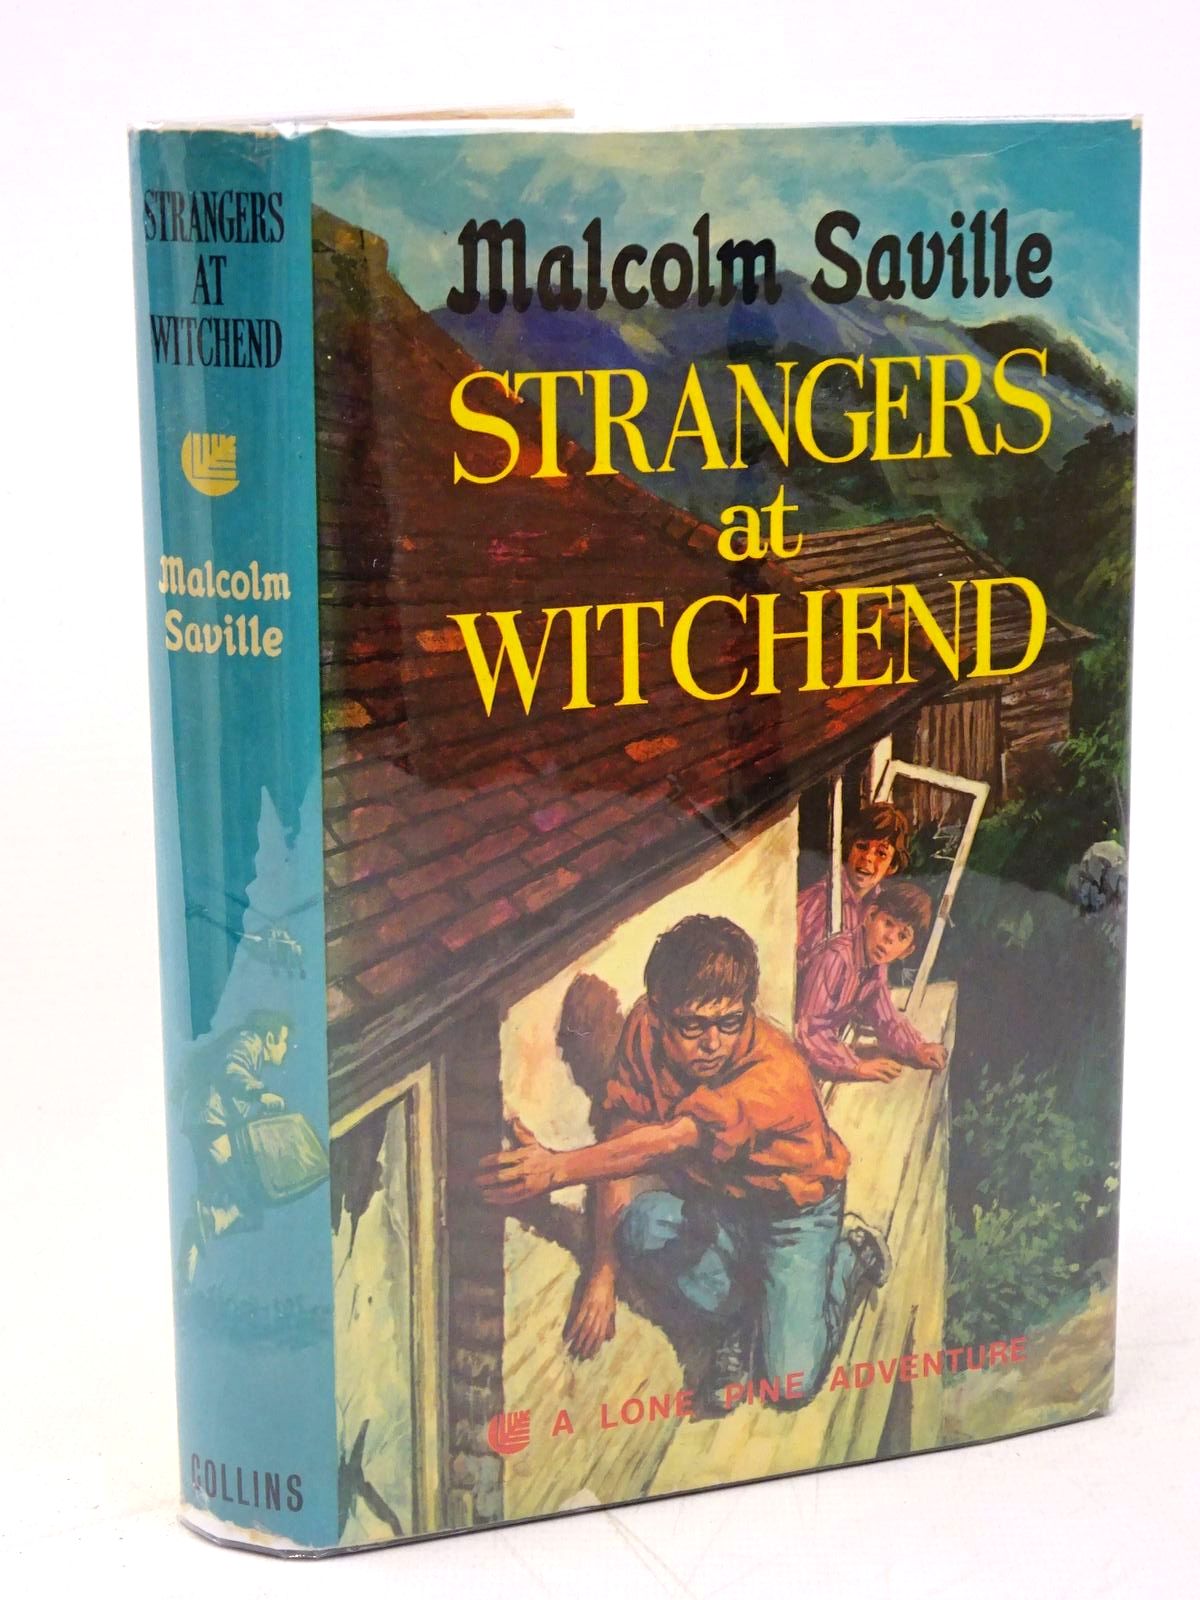 Cover of STRANGERS AT WITCHEND by Malcolm Saville